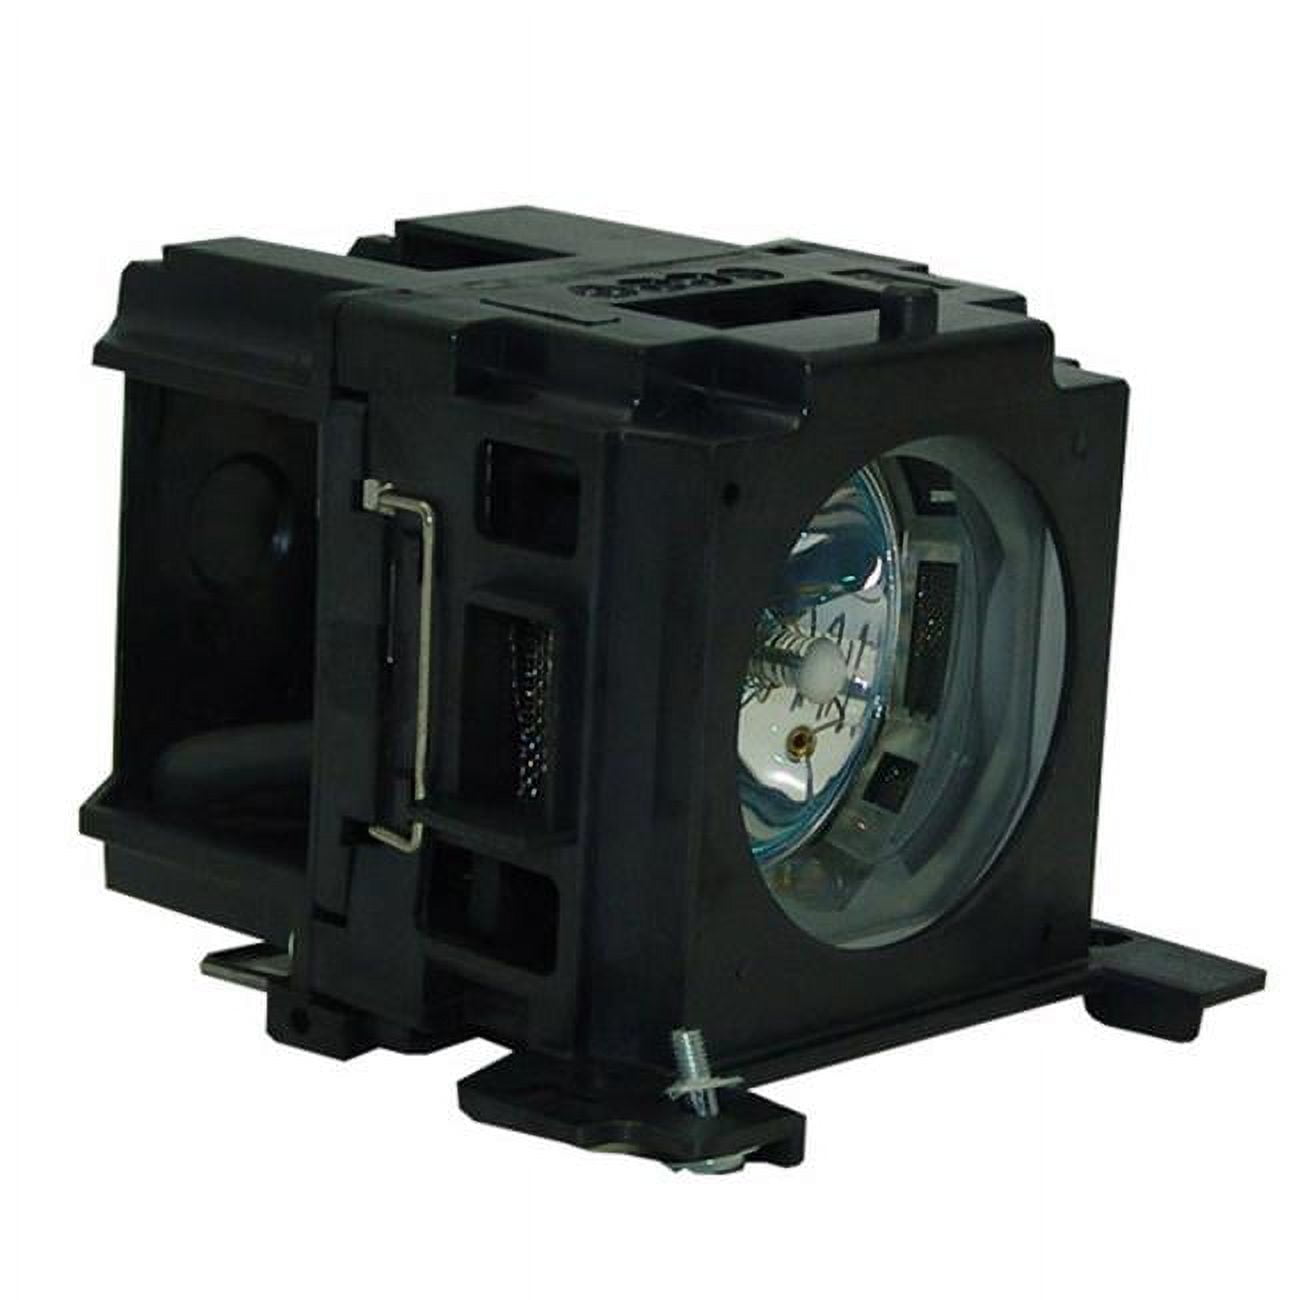 Picture of Dynamic Lamps 51201-G Liesegang ZU1208-04-4010 Compatible Projector Lamp Module